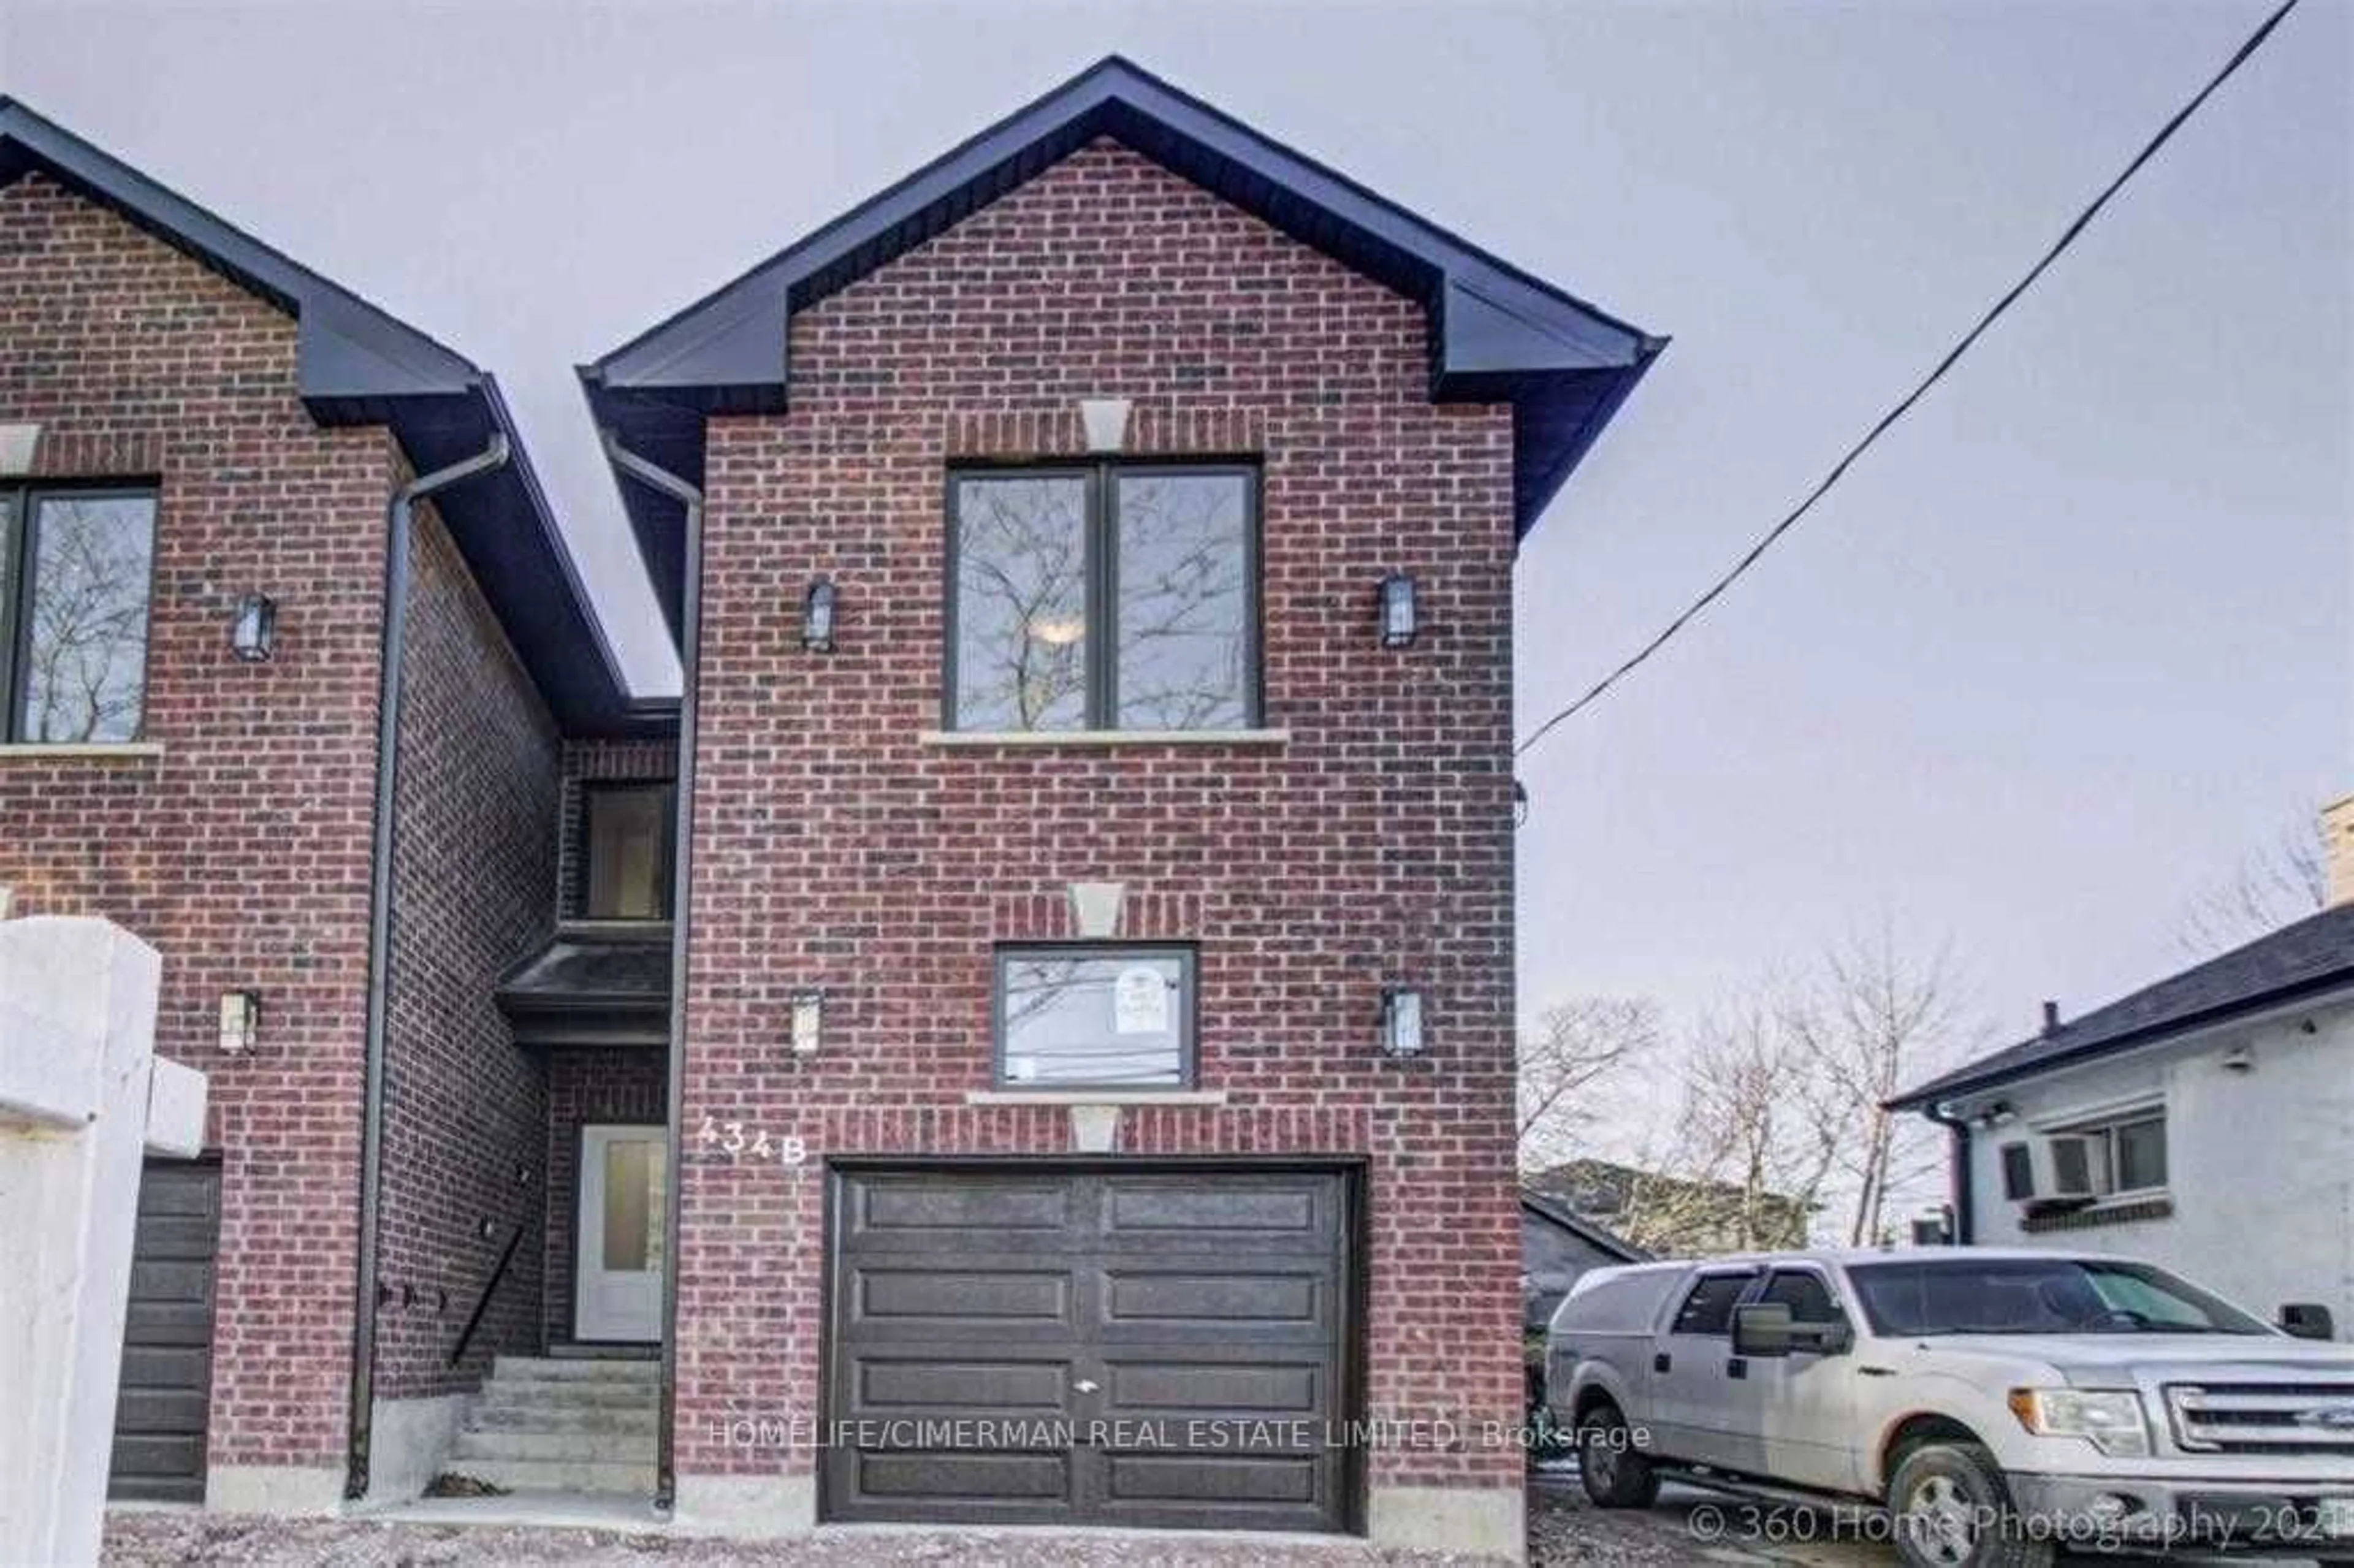 Home with brick exterior material for 434B Midland Ave, Toronto Ontario M1N 4A5